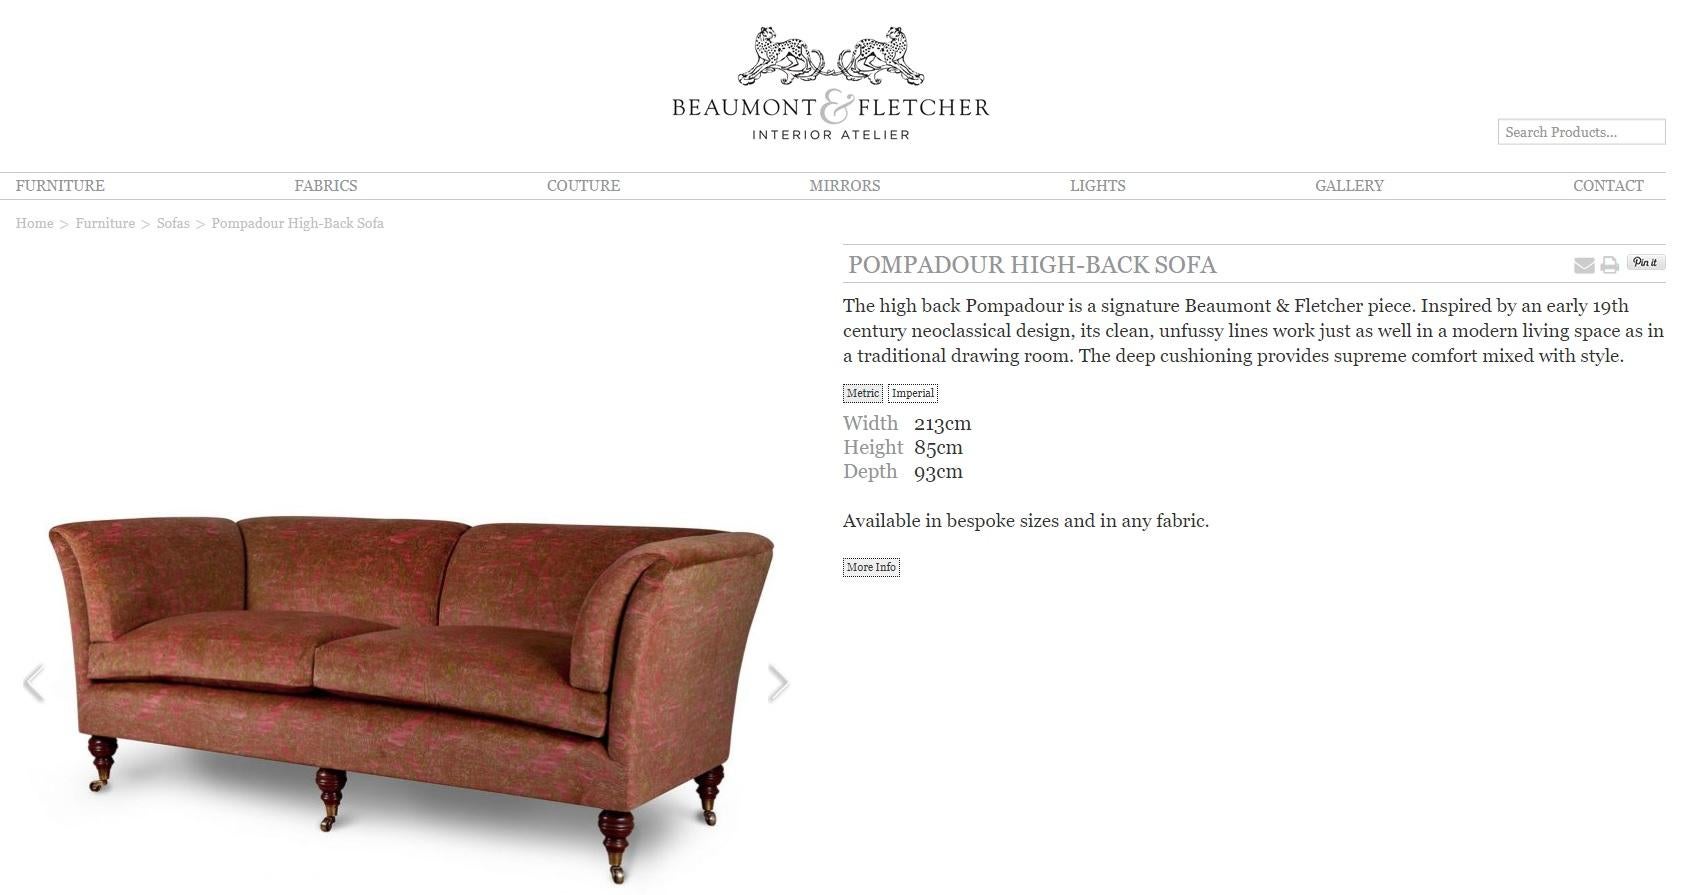 We are delighted to offer for sale this absolutely exceptional Beaumont & fletcher pompadour three seat sofa with overstuffed feather filled cushions 

Pompadour high-back sofa

The high back Pompadour is a signature Beaumont & Fletcher piece.